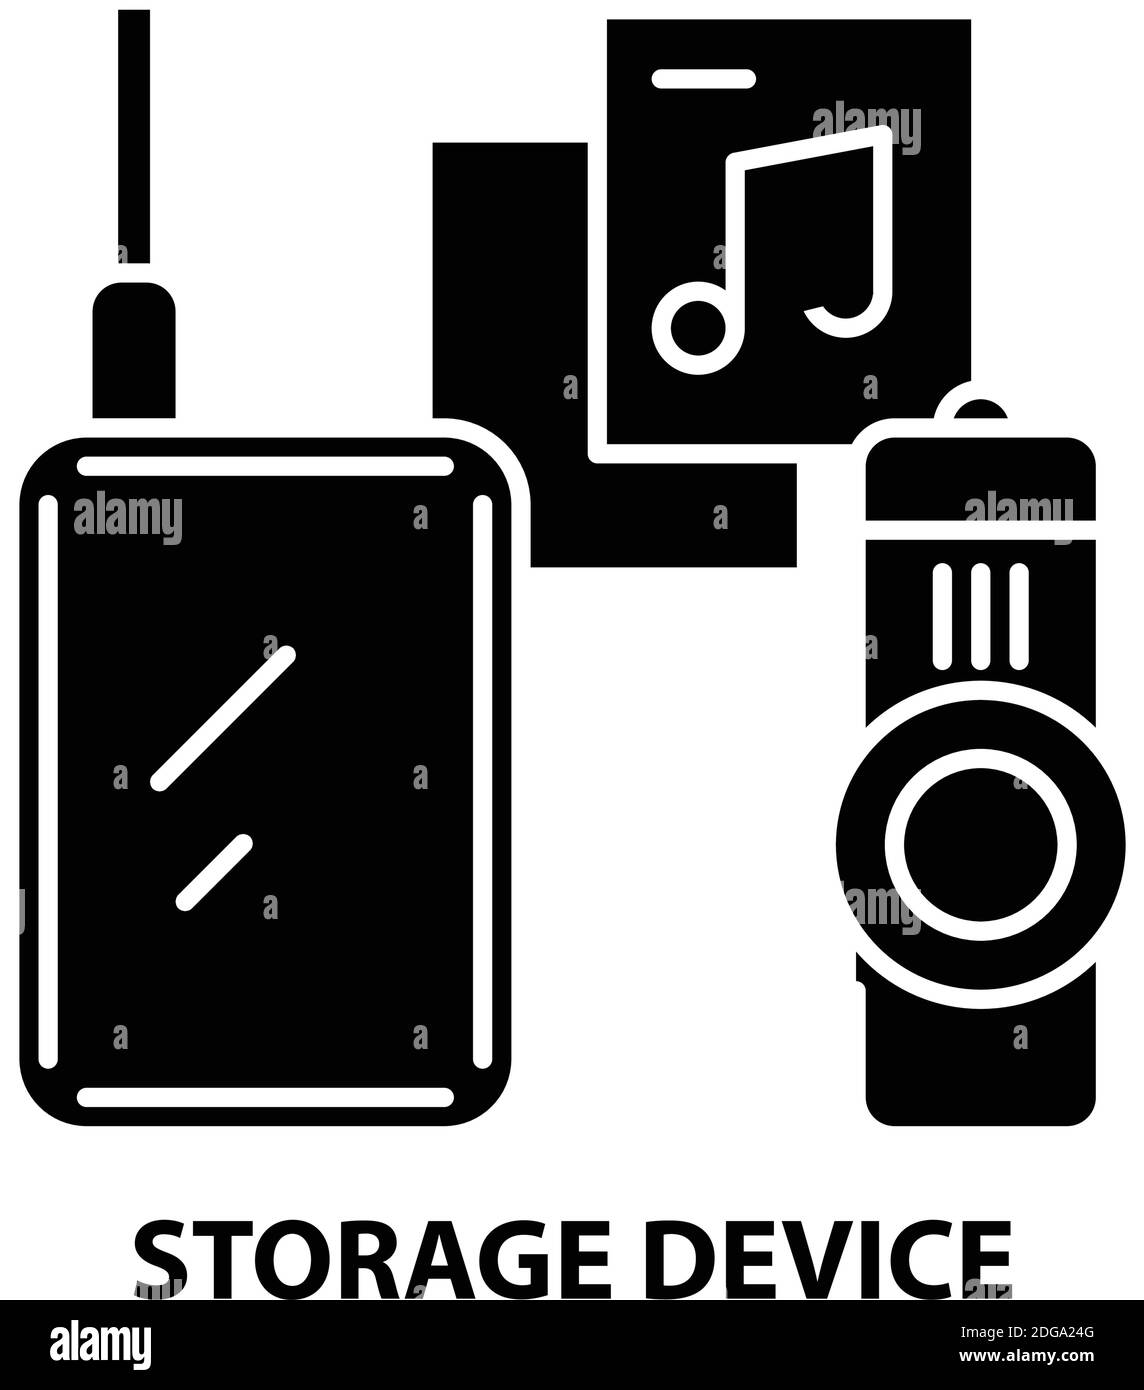 storage device icon, black vector sign with editable strokes, concept illustration Stock Vector